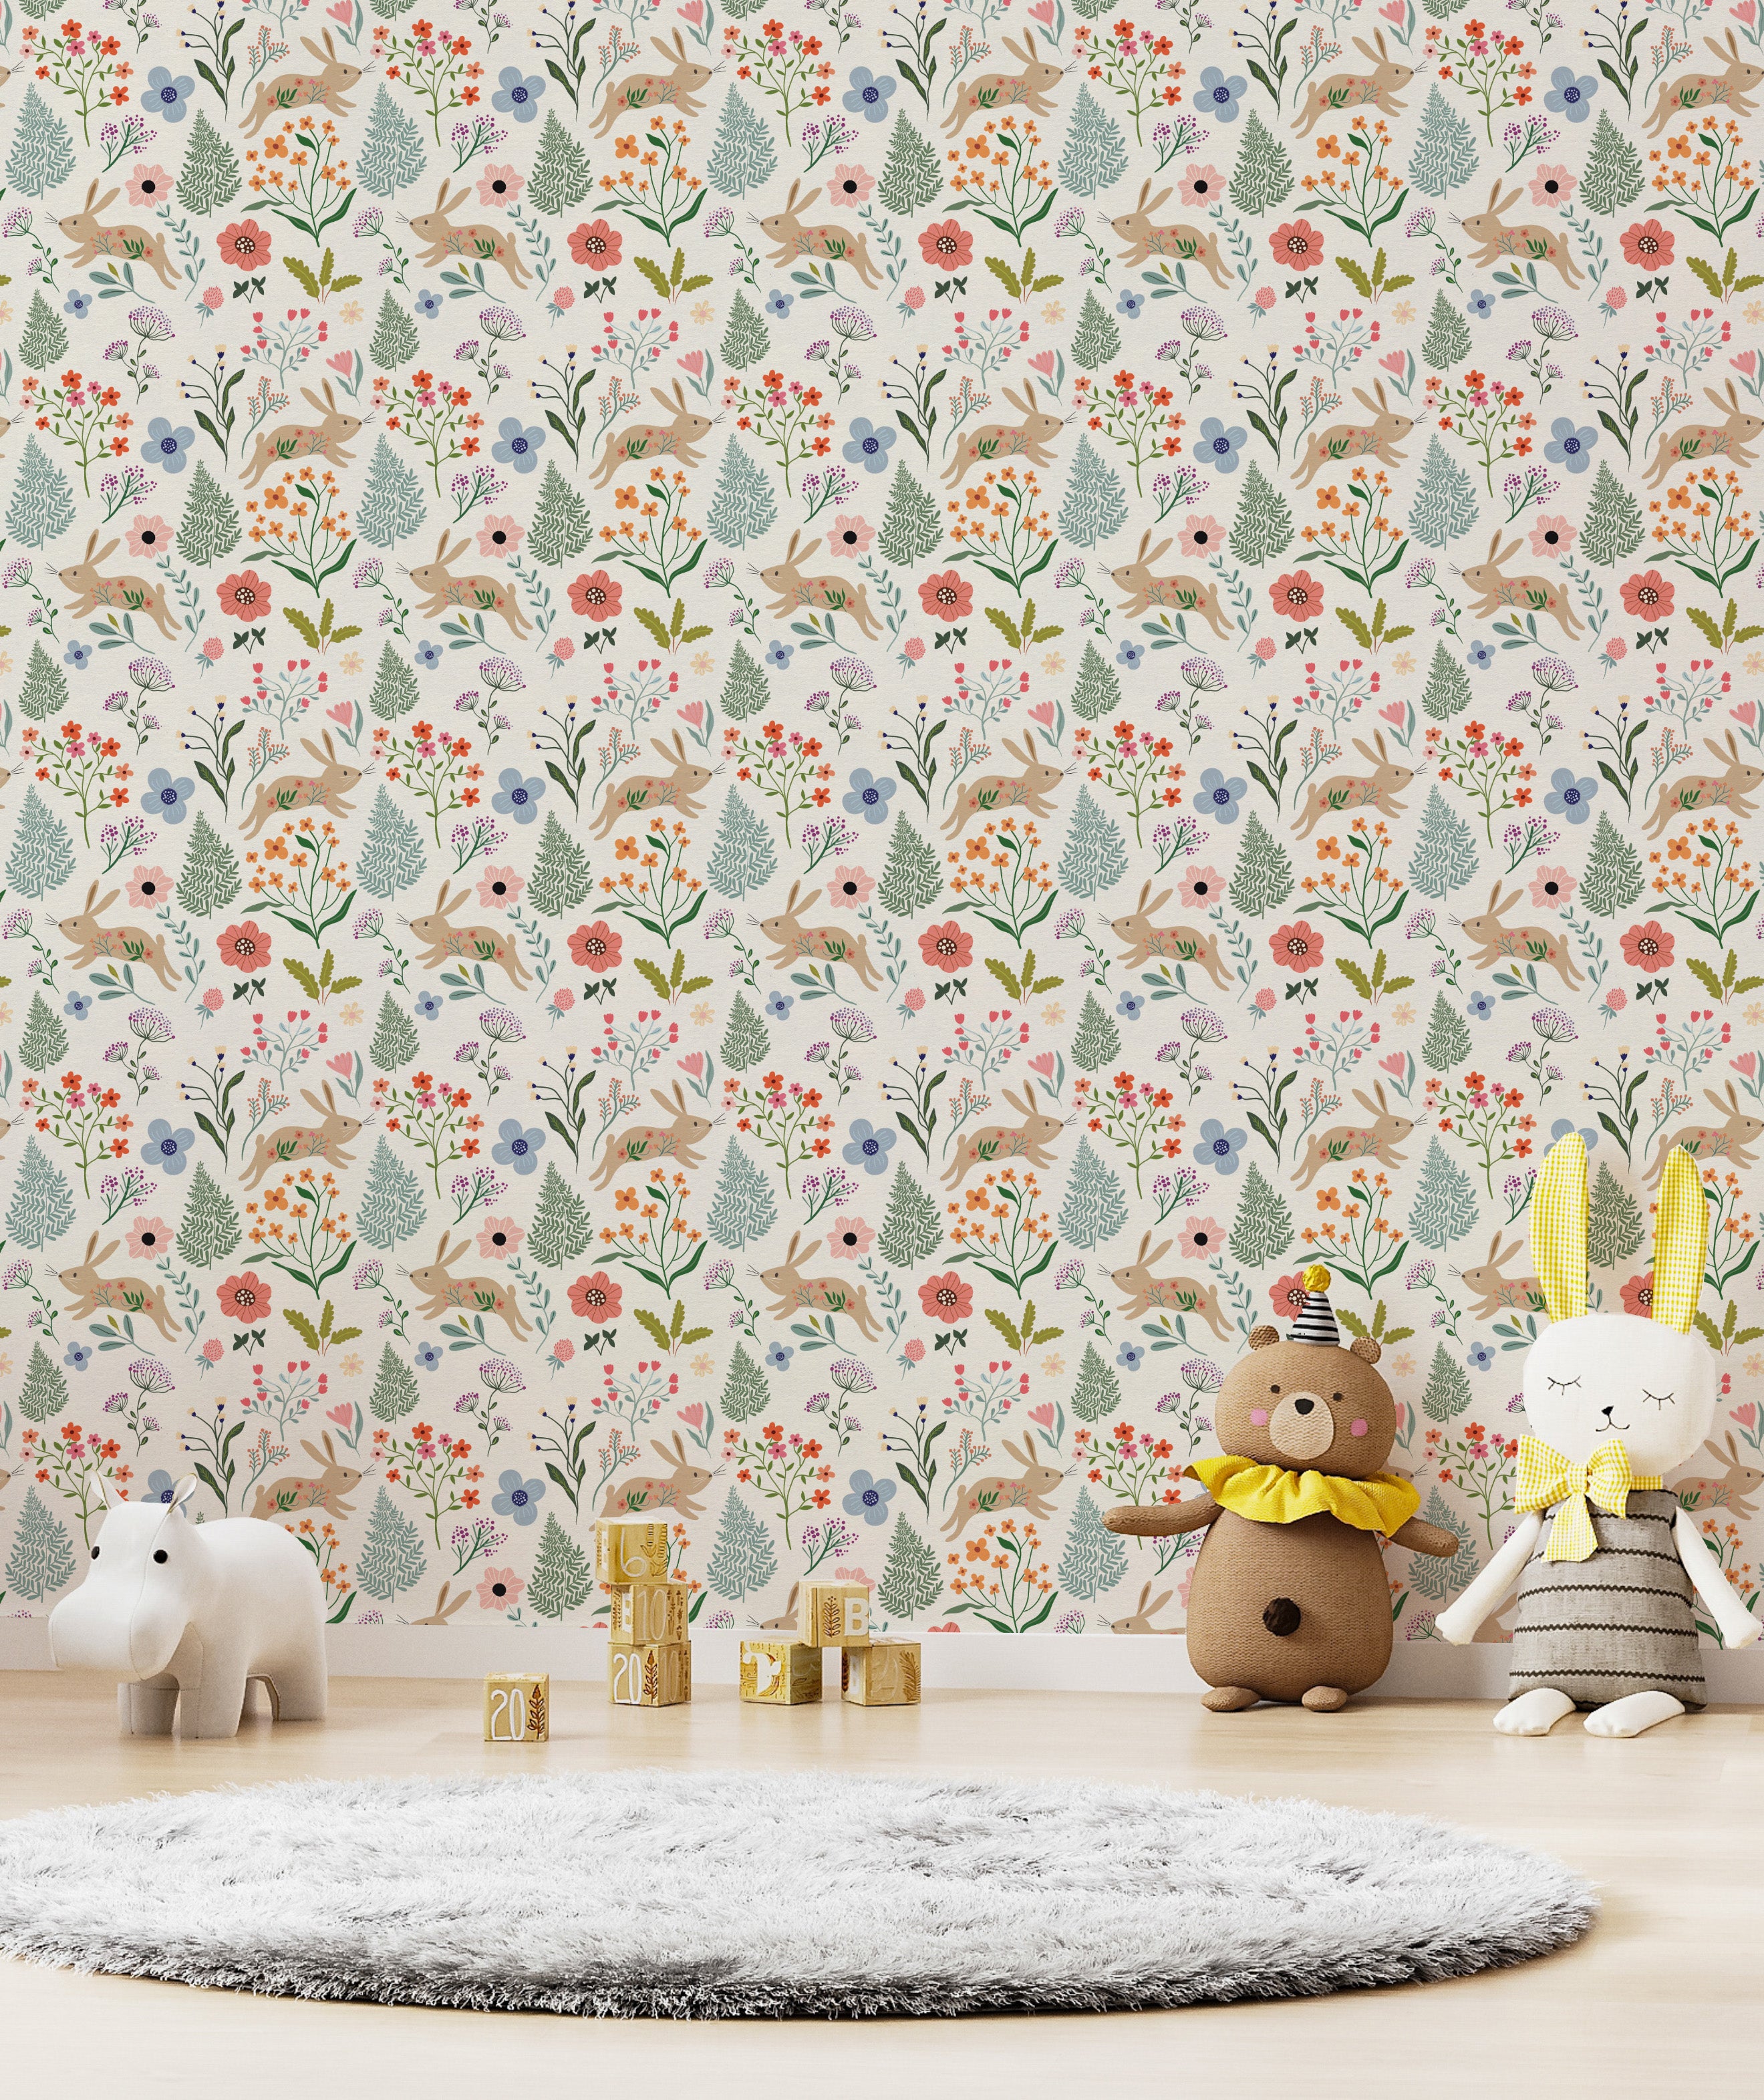 A playful children’s play area with Colourful Spring Bunnies Wallpaper featuring a lively pattern of rabbits, floral motifs, and green foliage. The setting includes soft toys, wooden blocks spelling out the year, and a gray plush rug, creating a whimsical and inviting space for kids